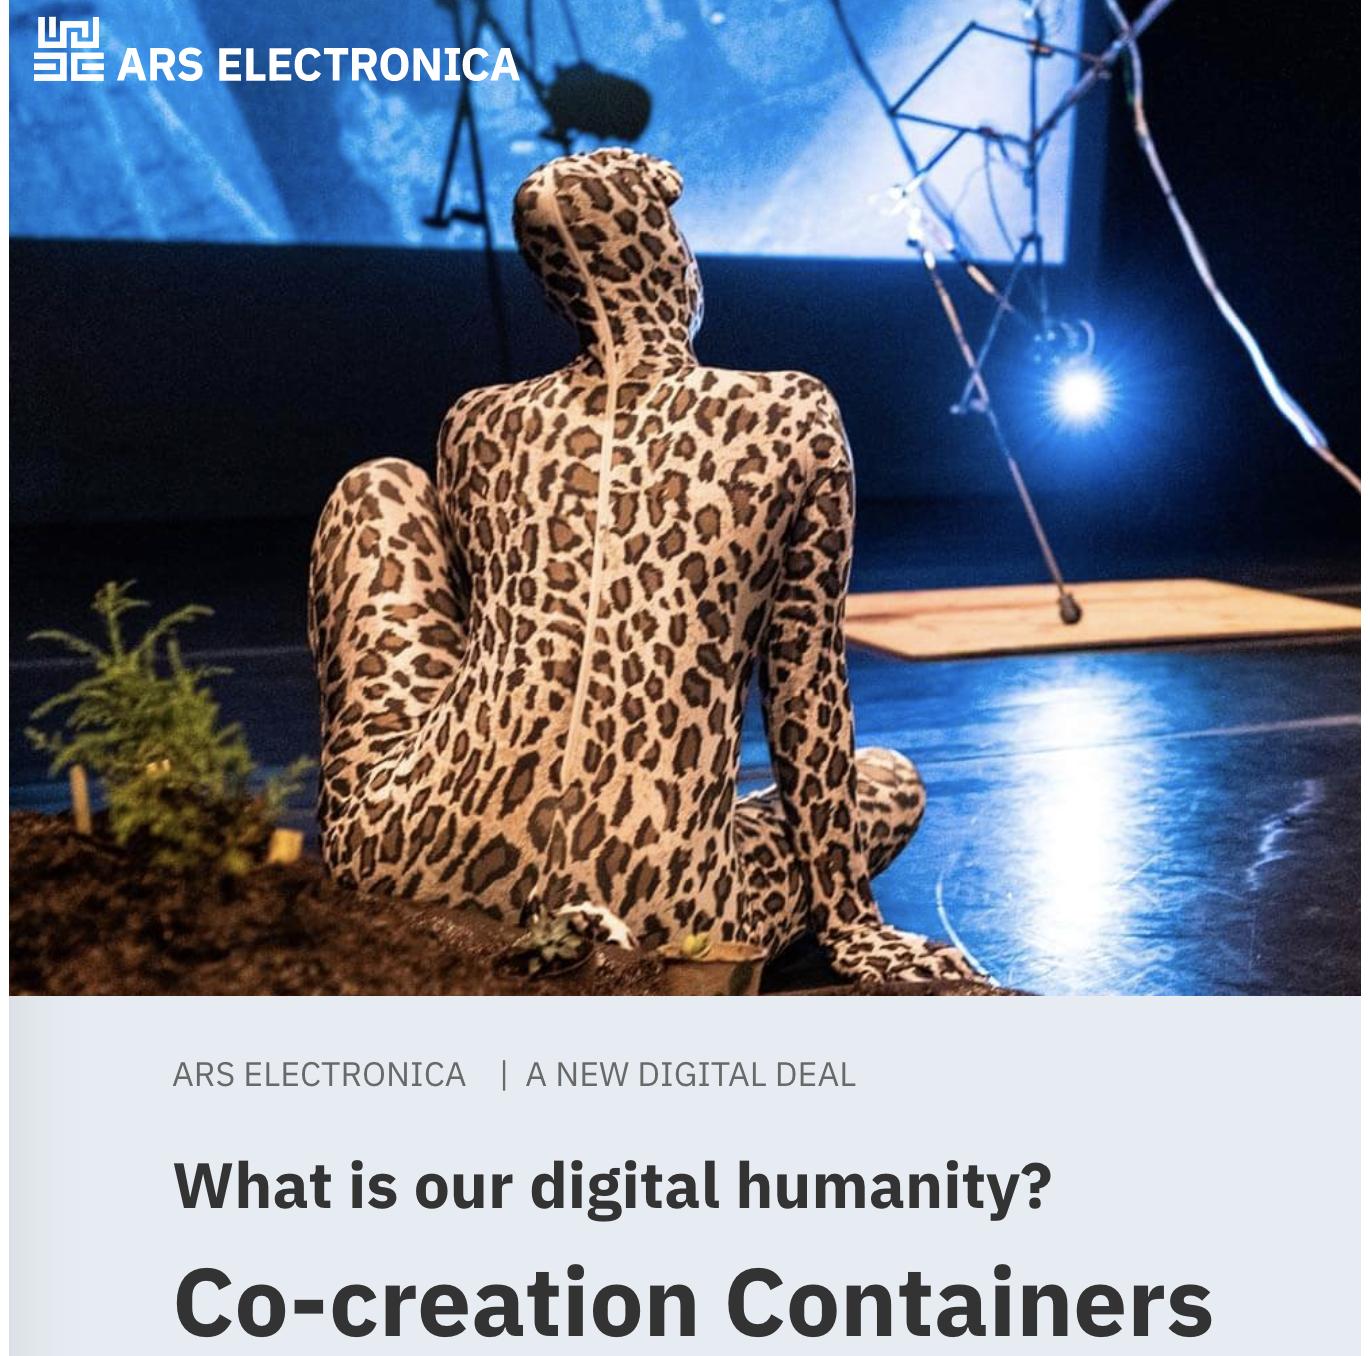 A flyer for Ars Electronica